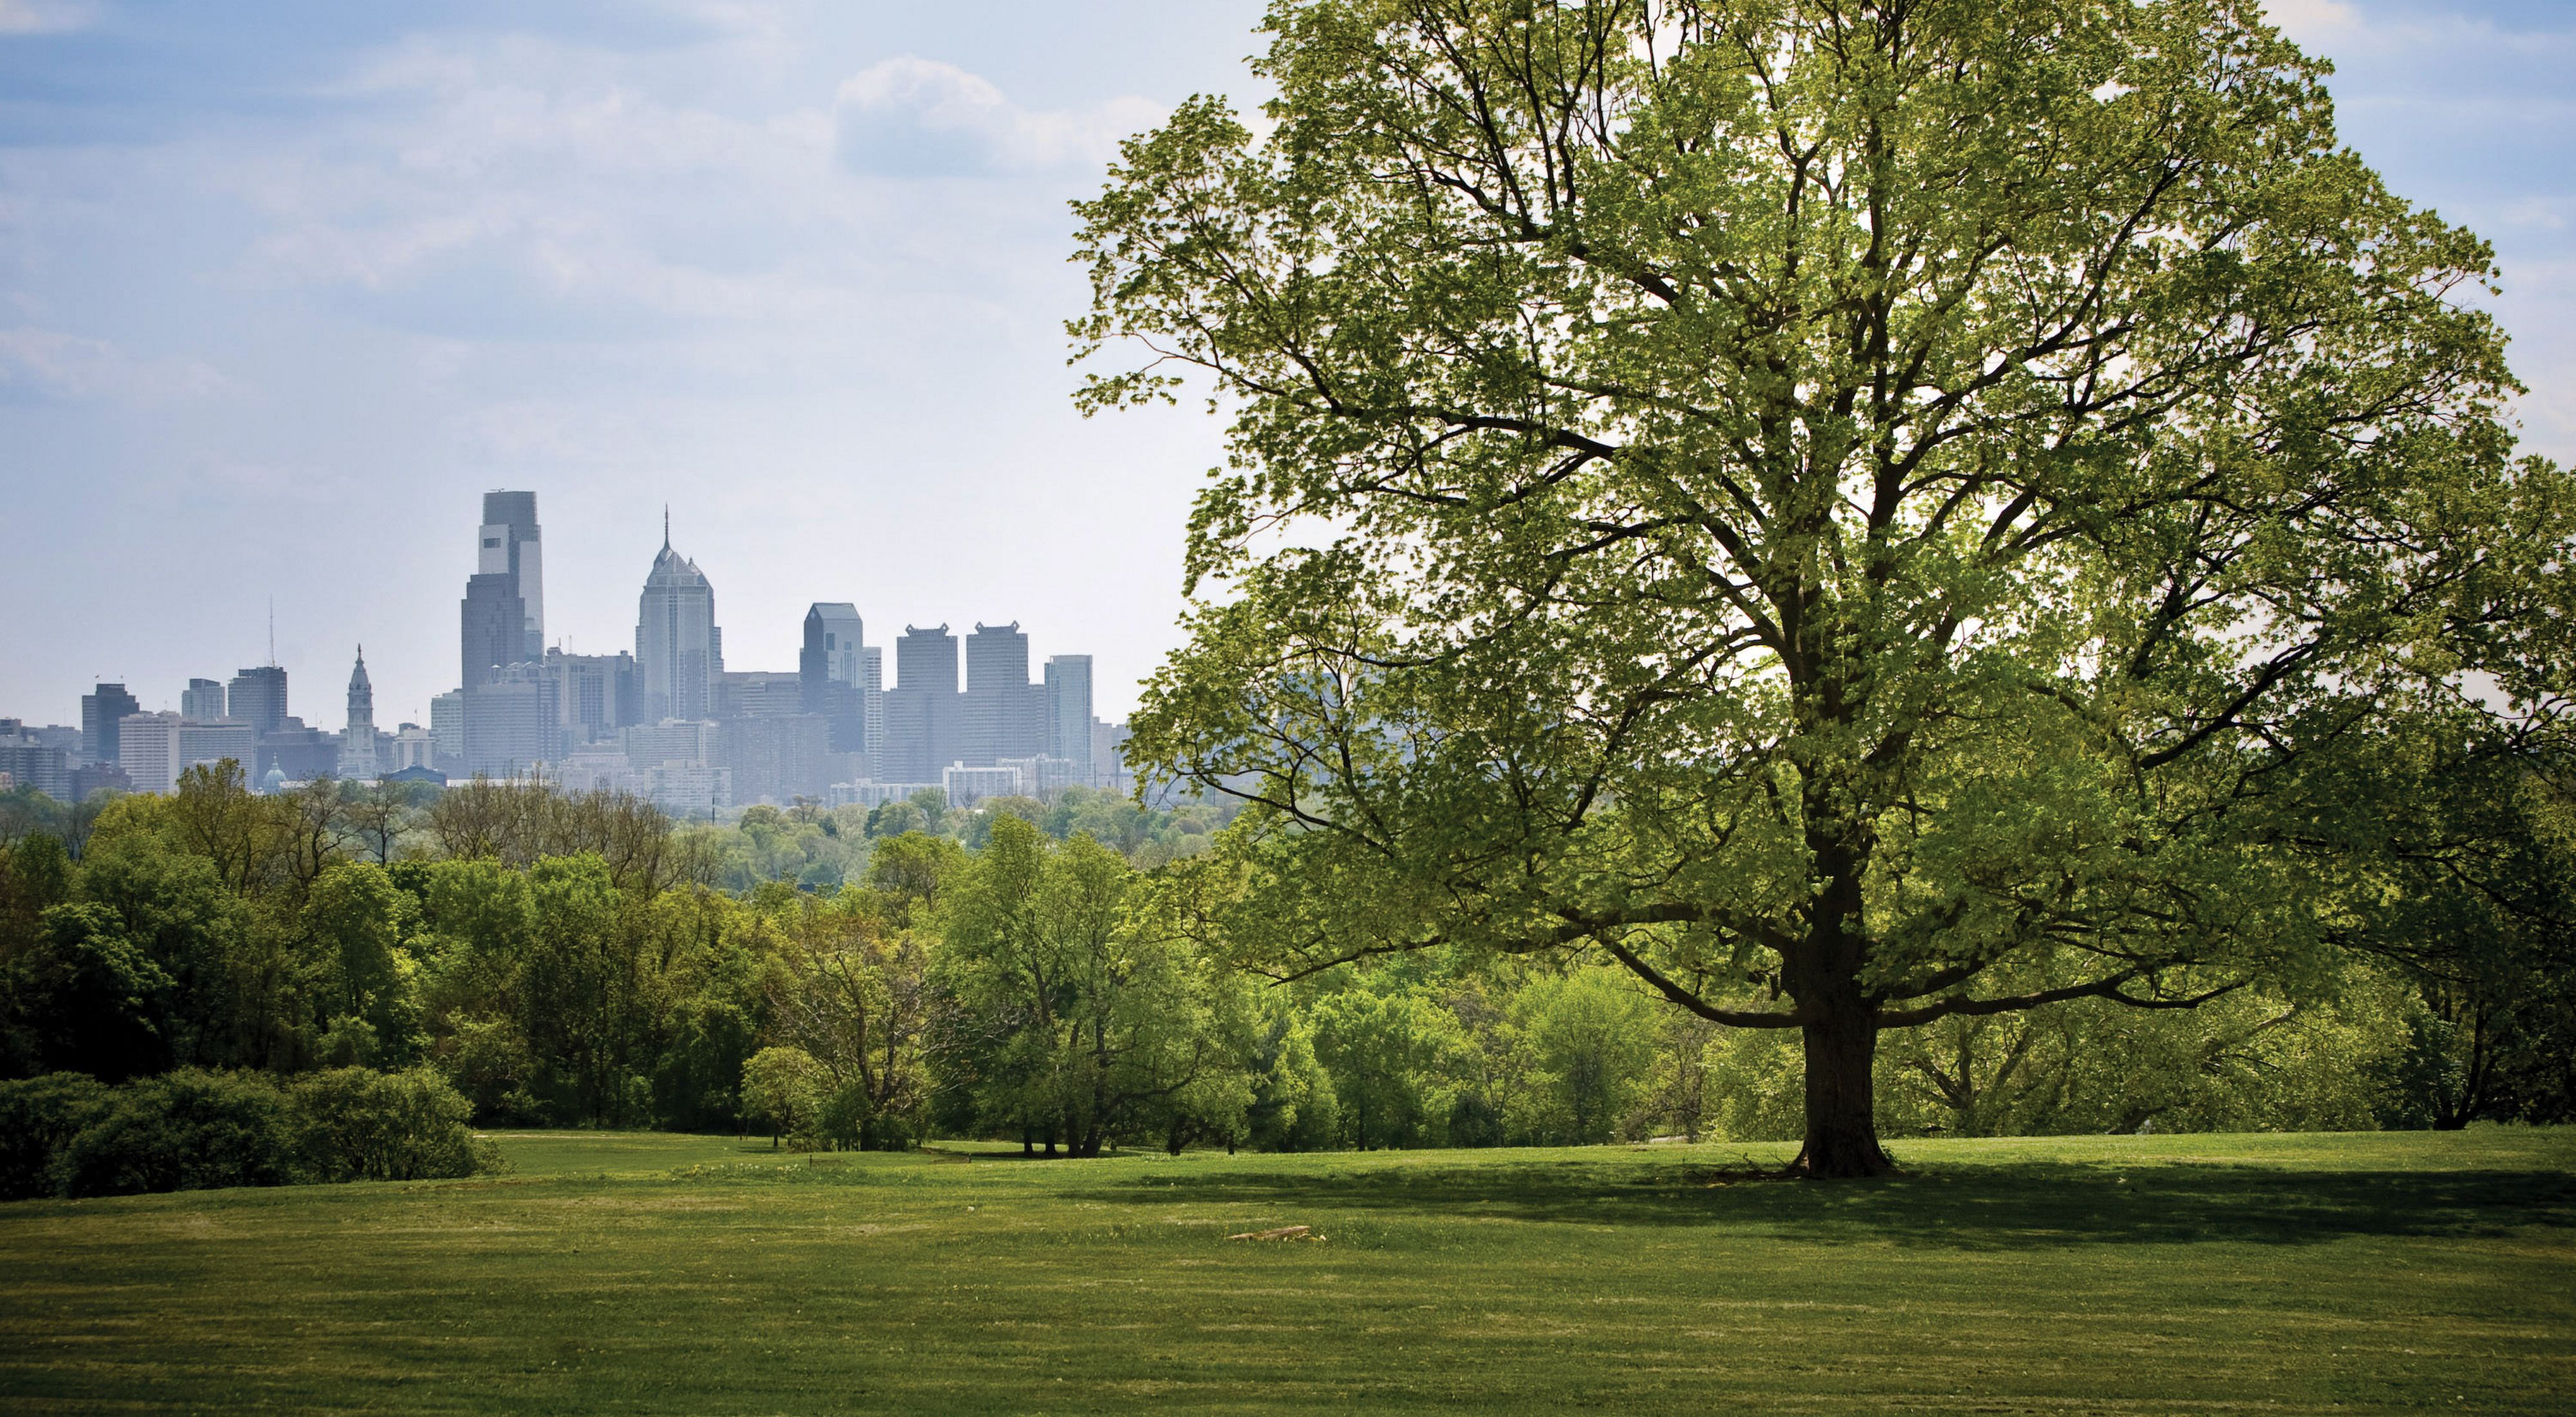 View across the river of the Philadelphia skyline. A tree in the foreground frames the city skyline in the background.